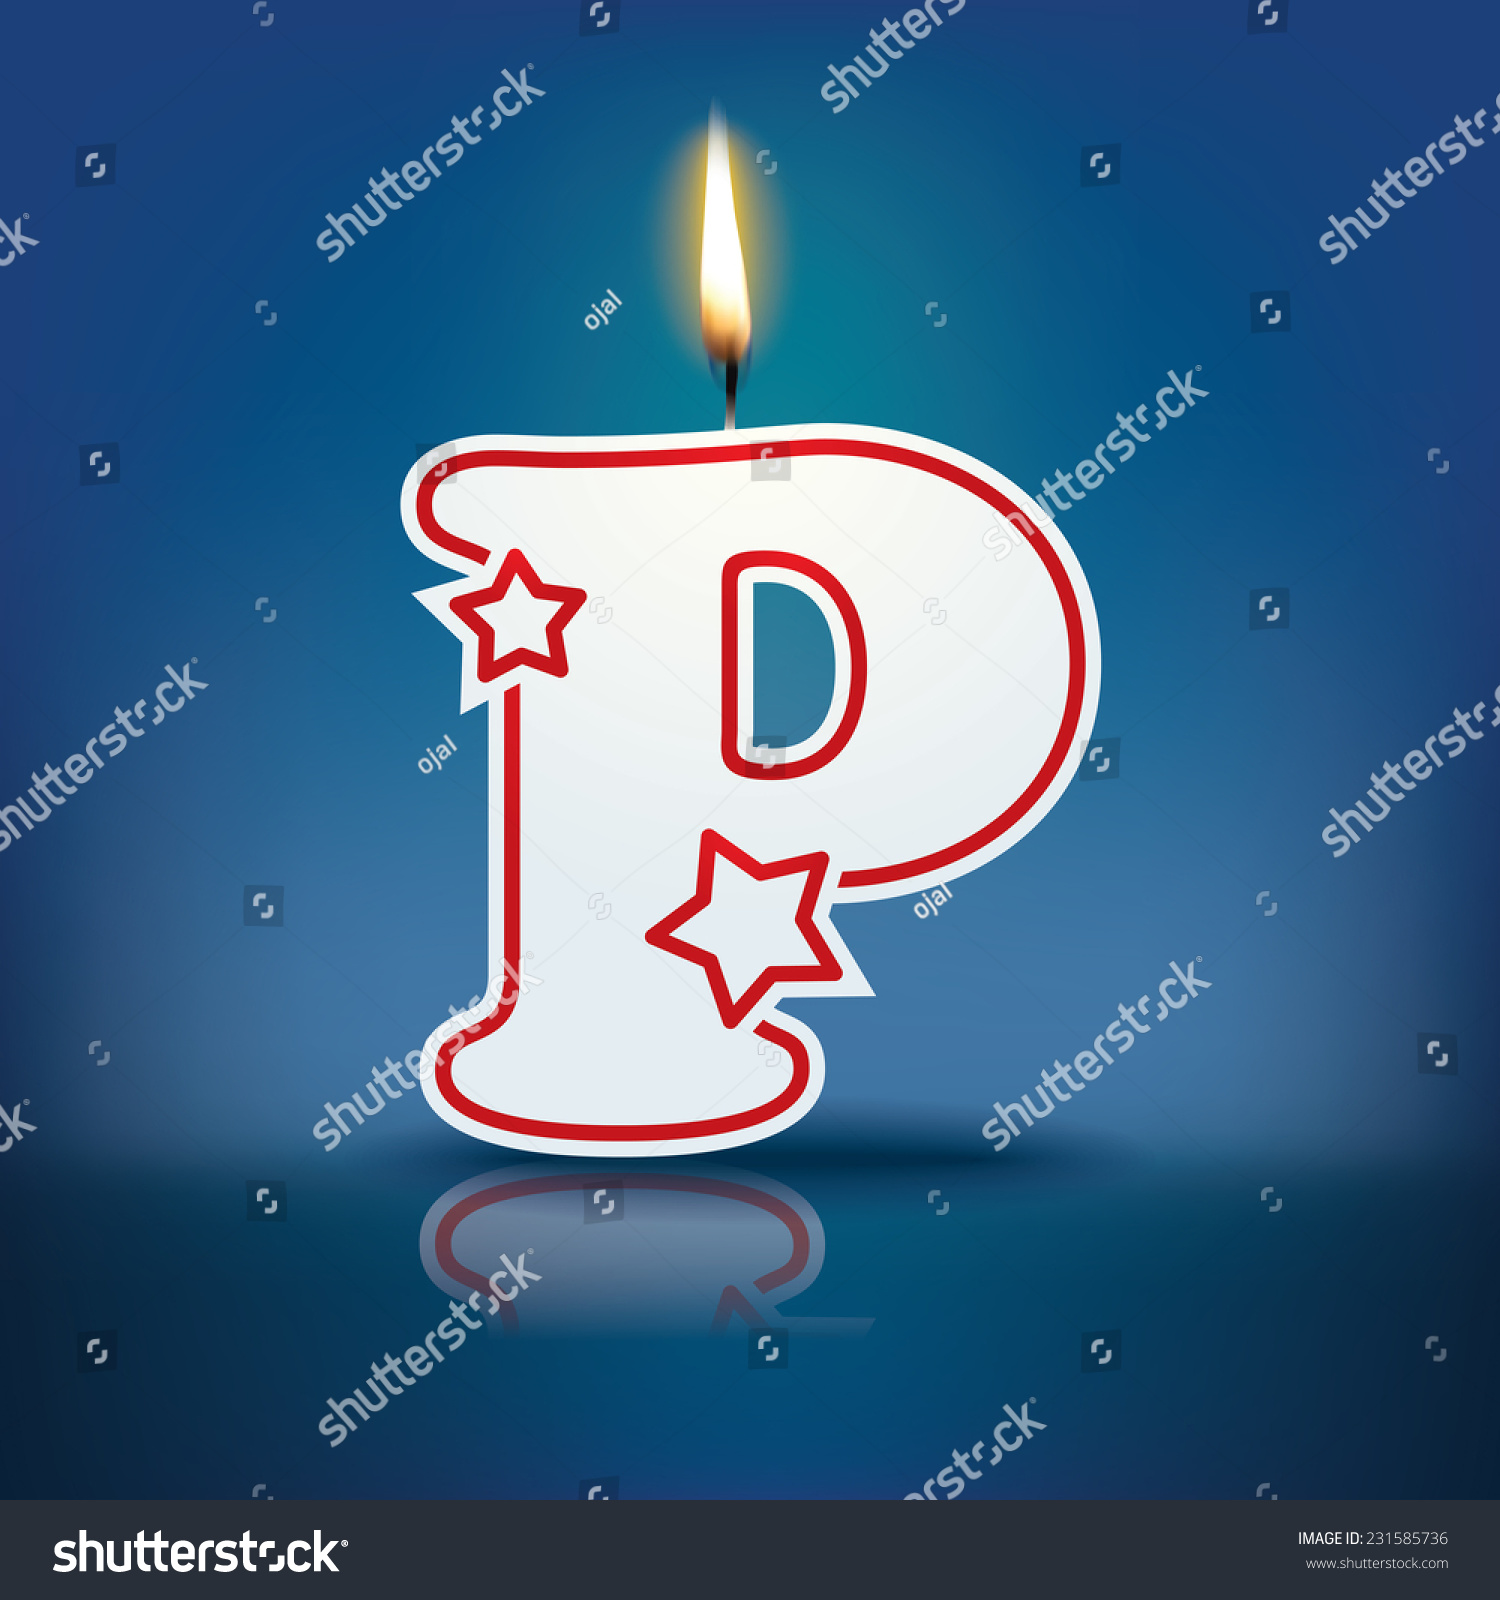 SVG of Candle letter P with flame - eps 10 vector illustration svg